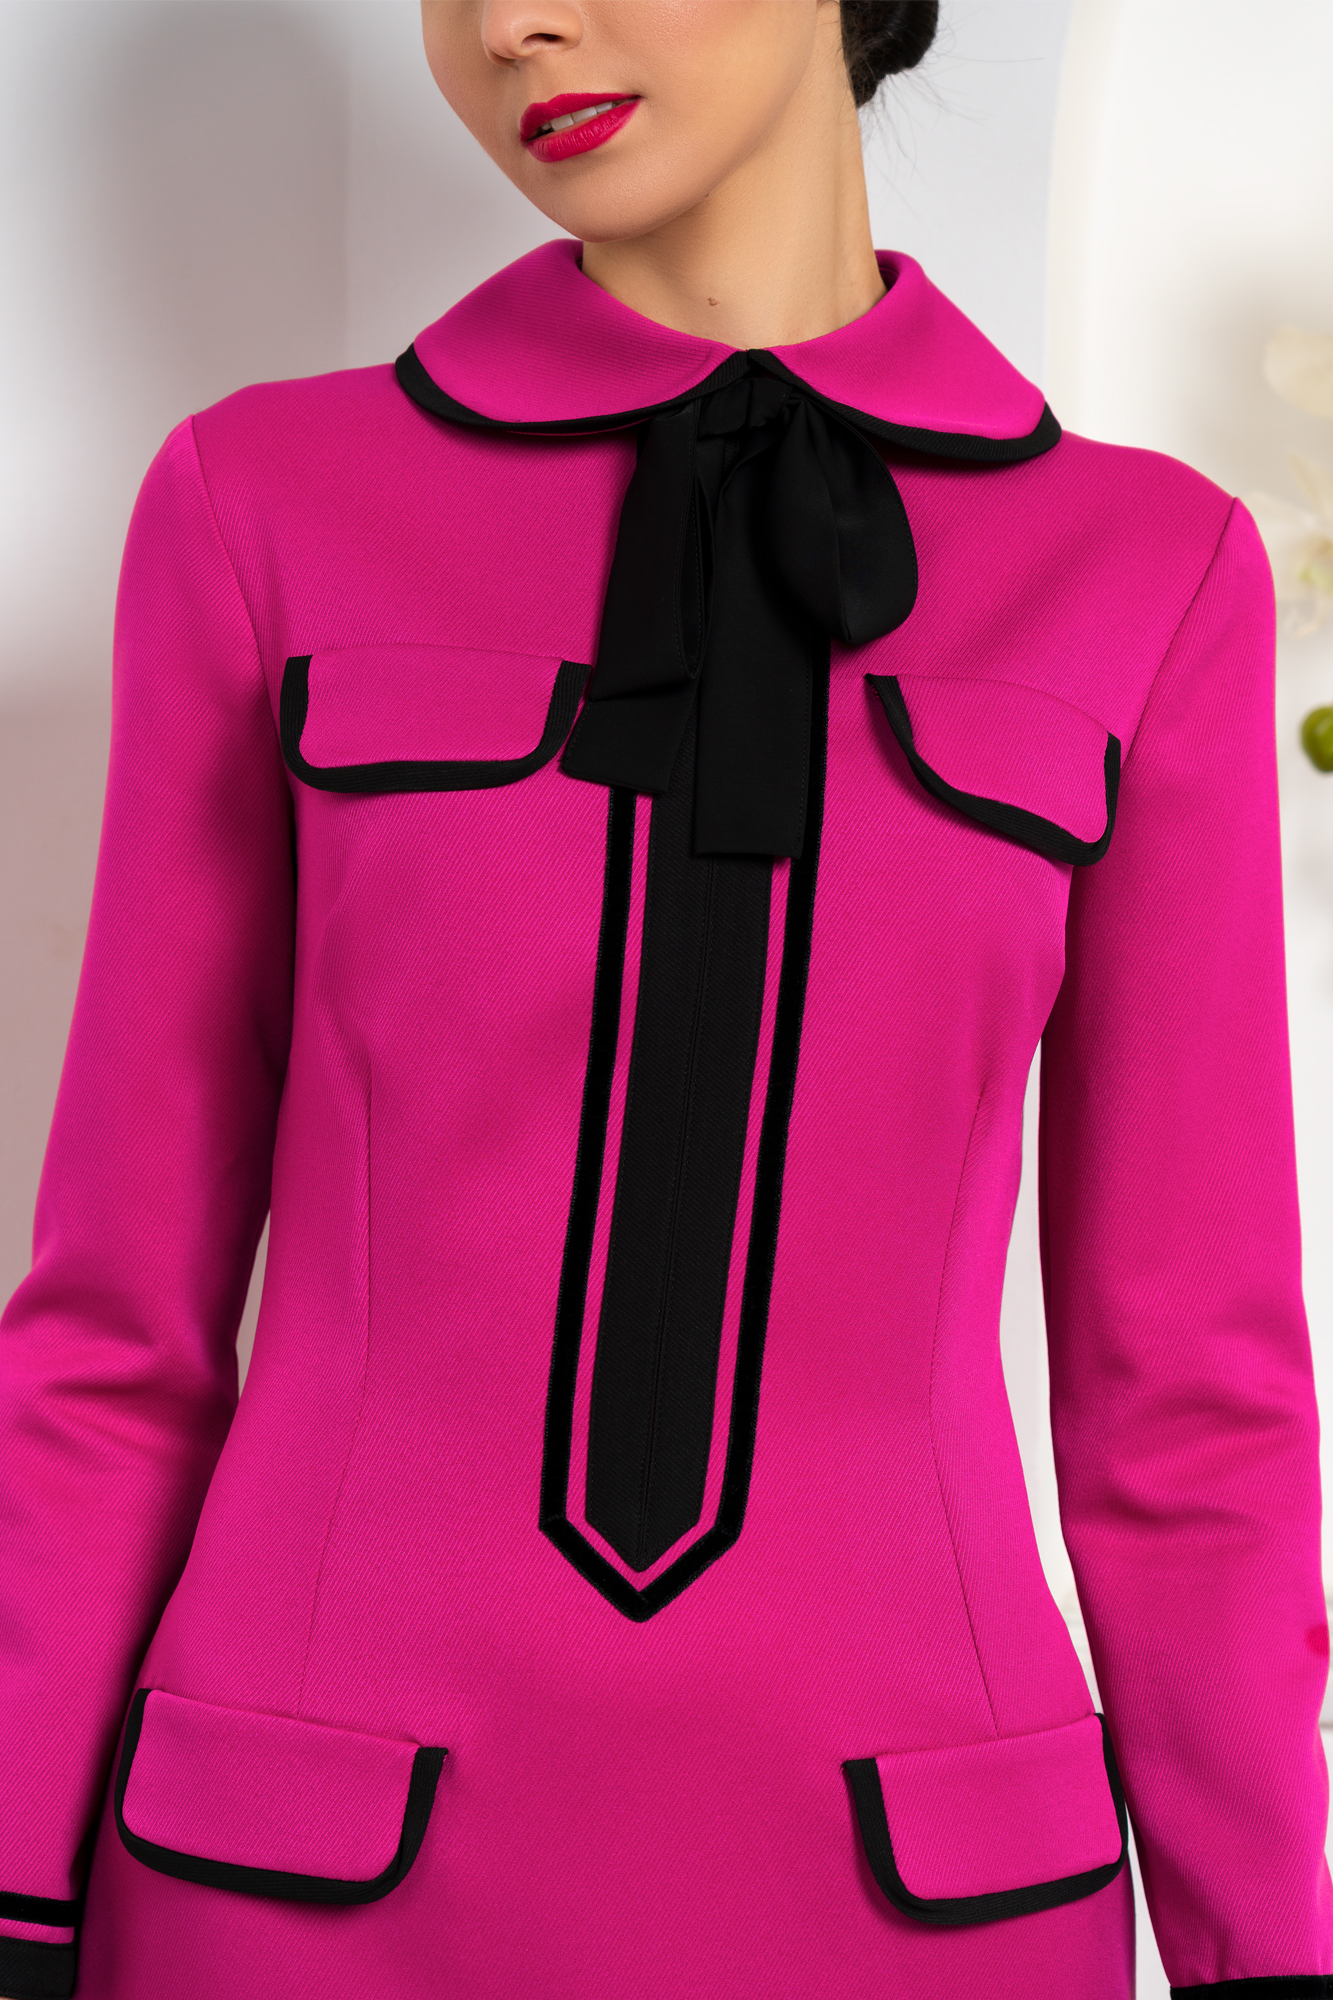 Bow Neck Piped Dress In Fuchsia